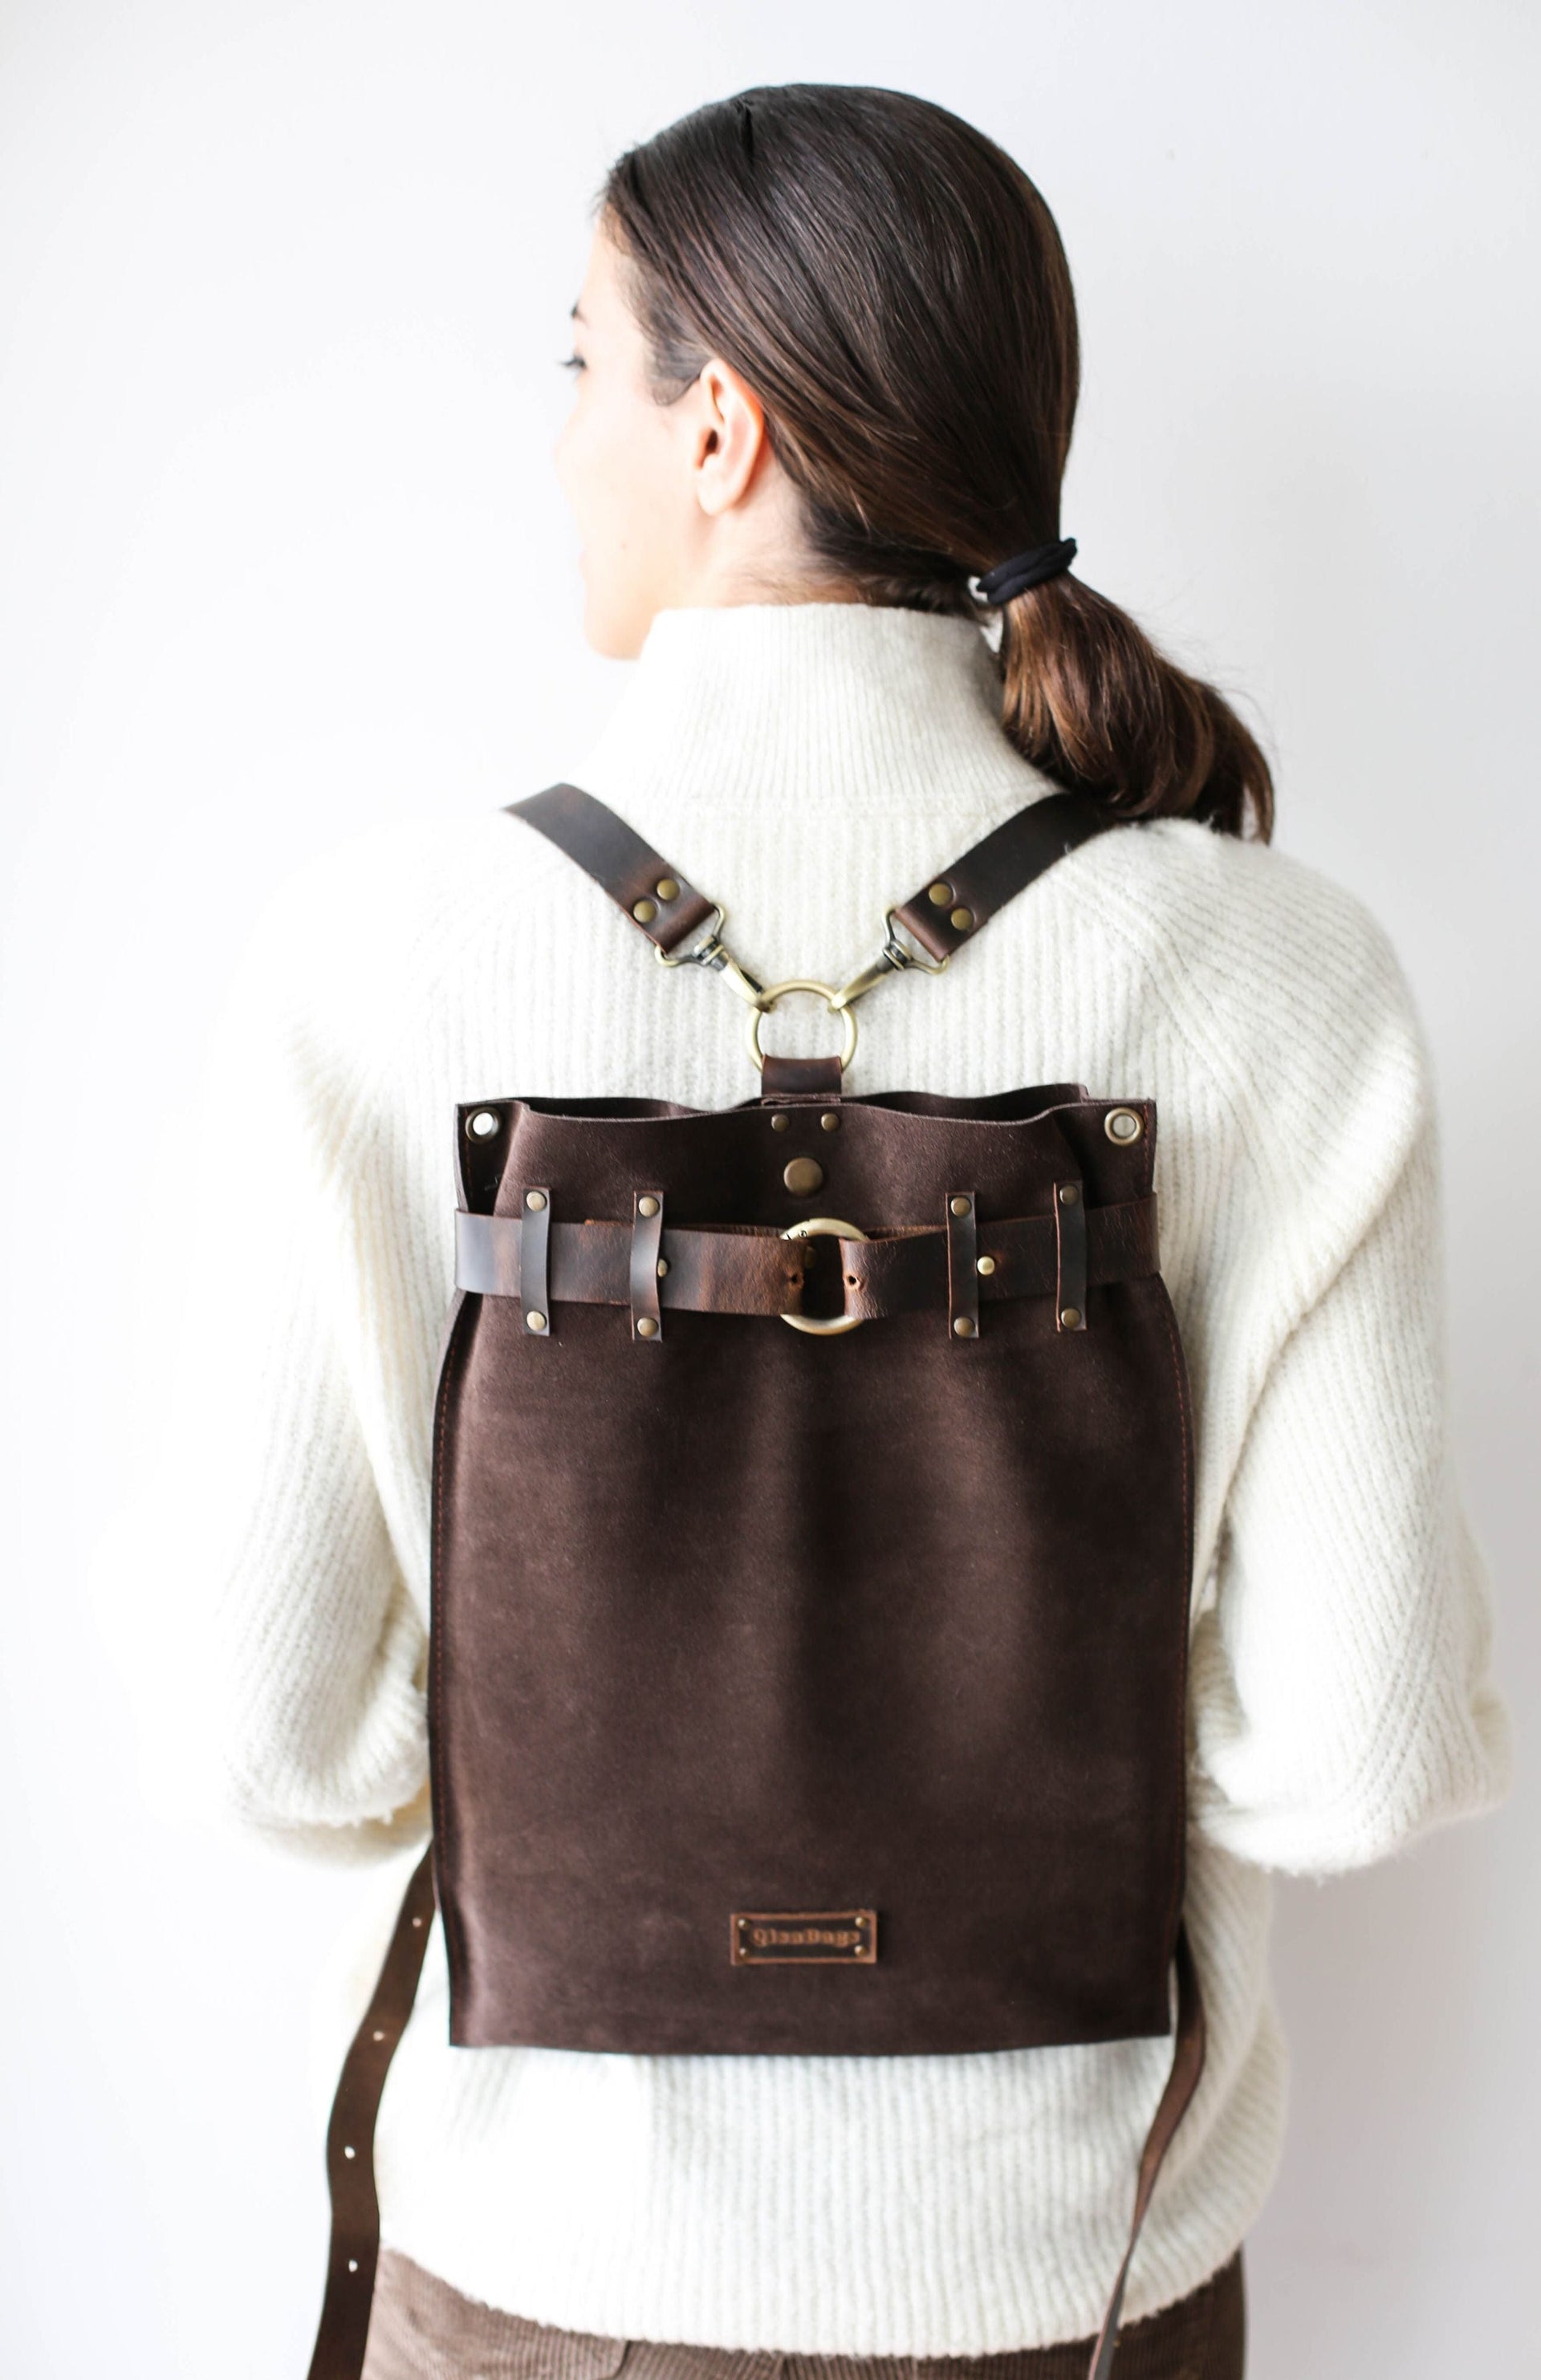 Designer Leather Backpack from Qisabags